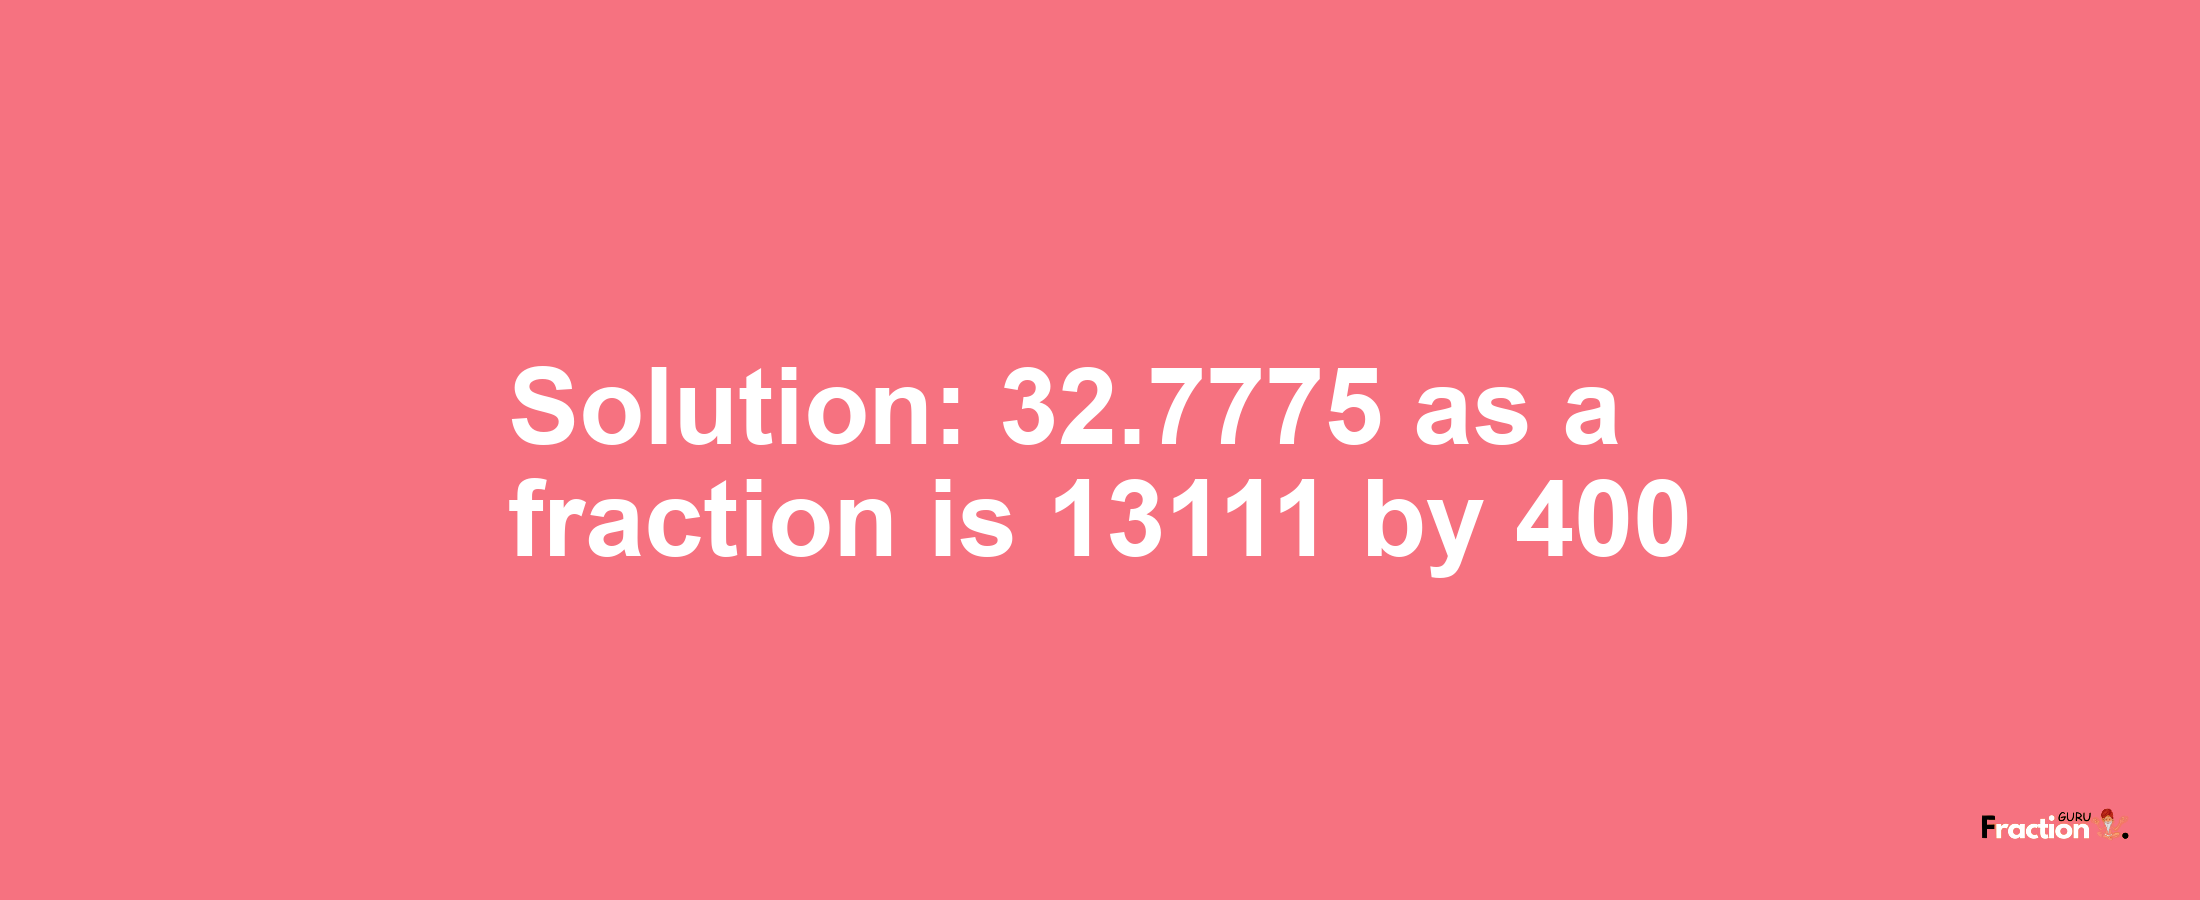 Solution:32.7775 as a fraction is 13111/400